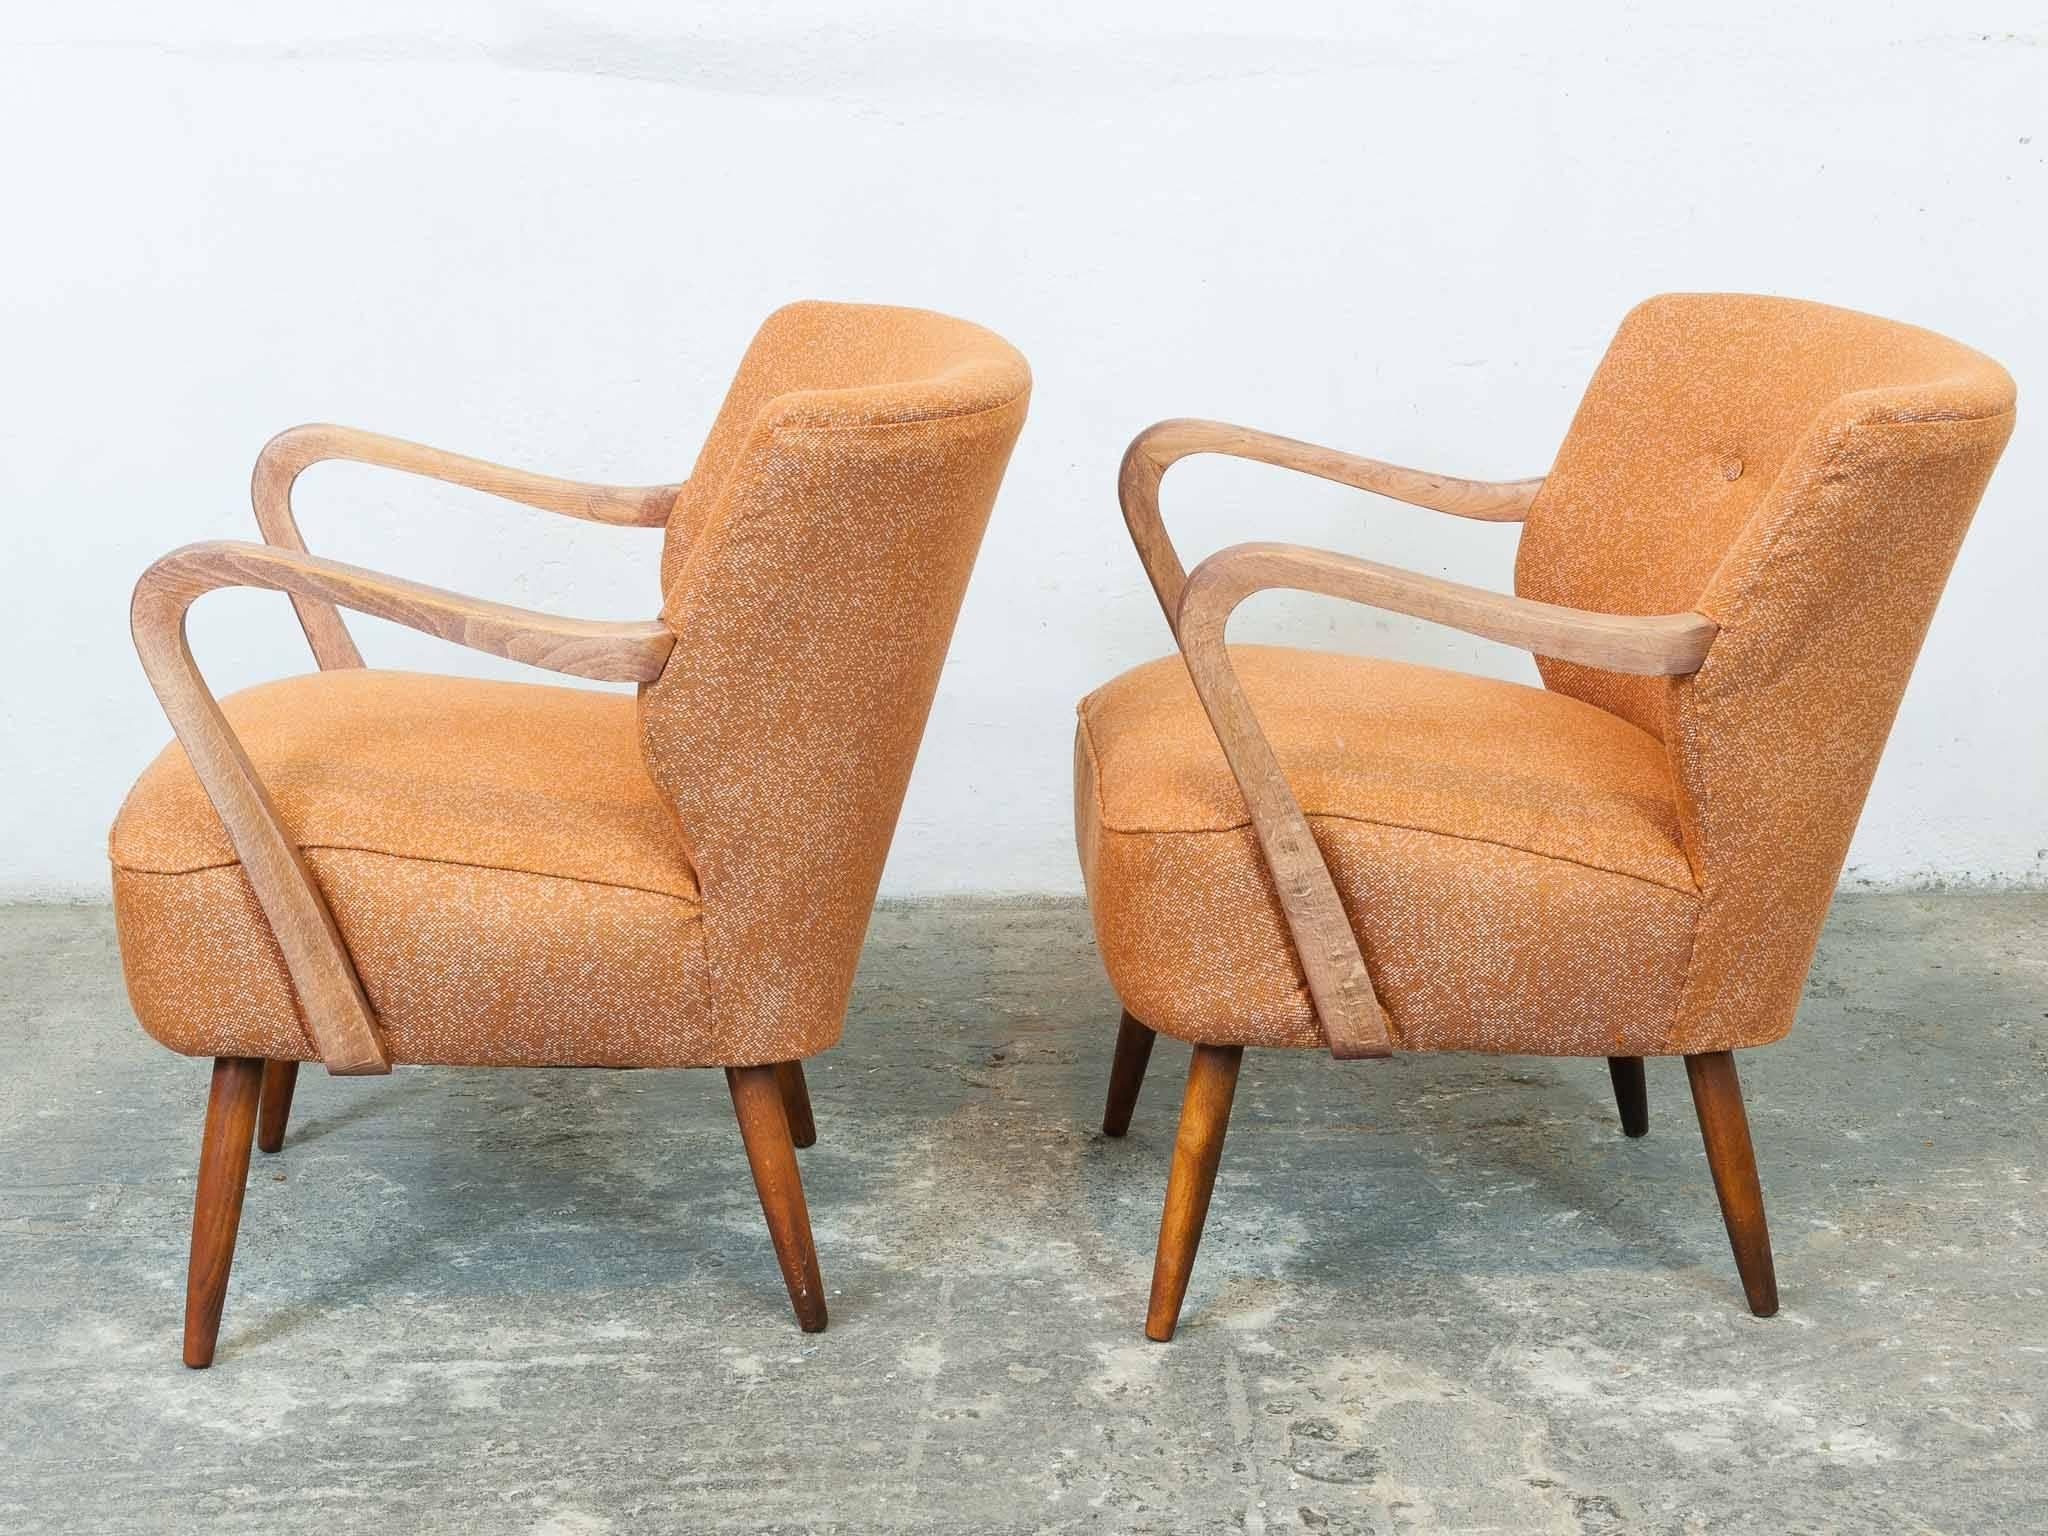 20th Century Pair of 1940s Vintage Midcentury Cocktail Chairs in Astro Orange Fabric